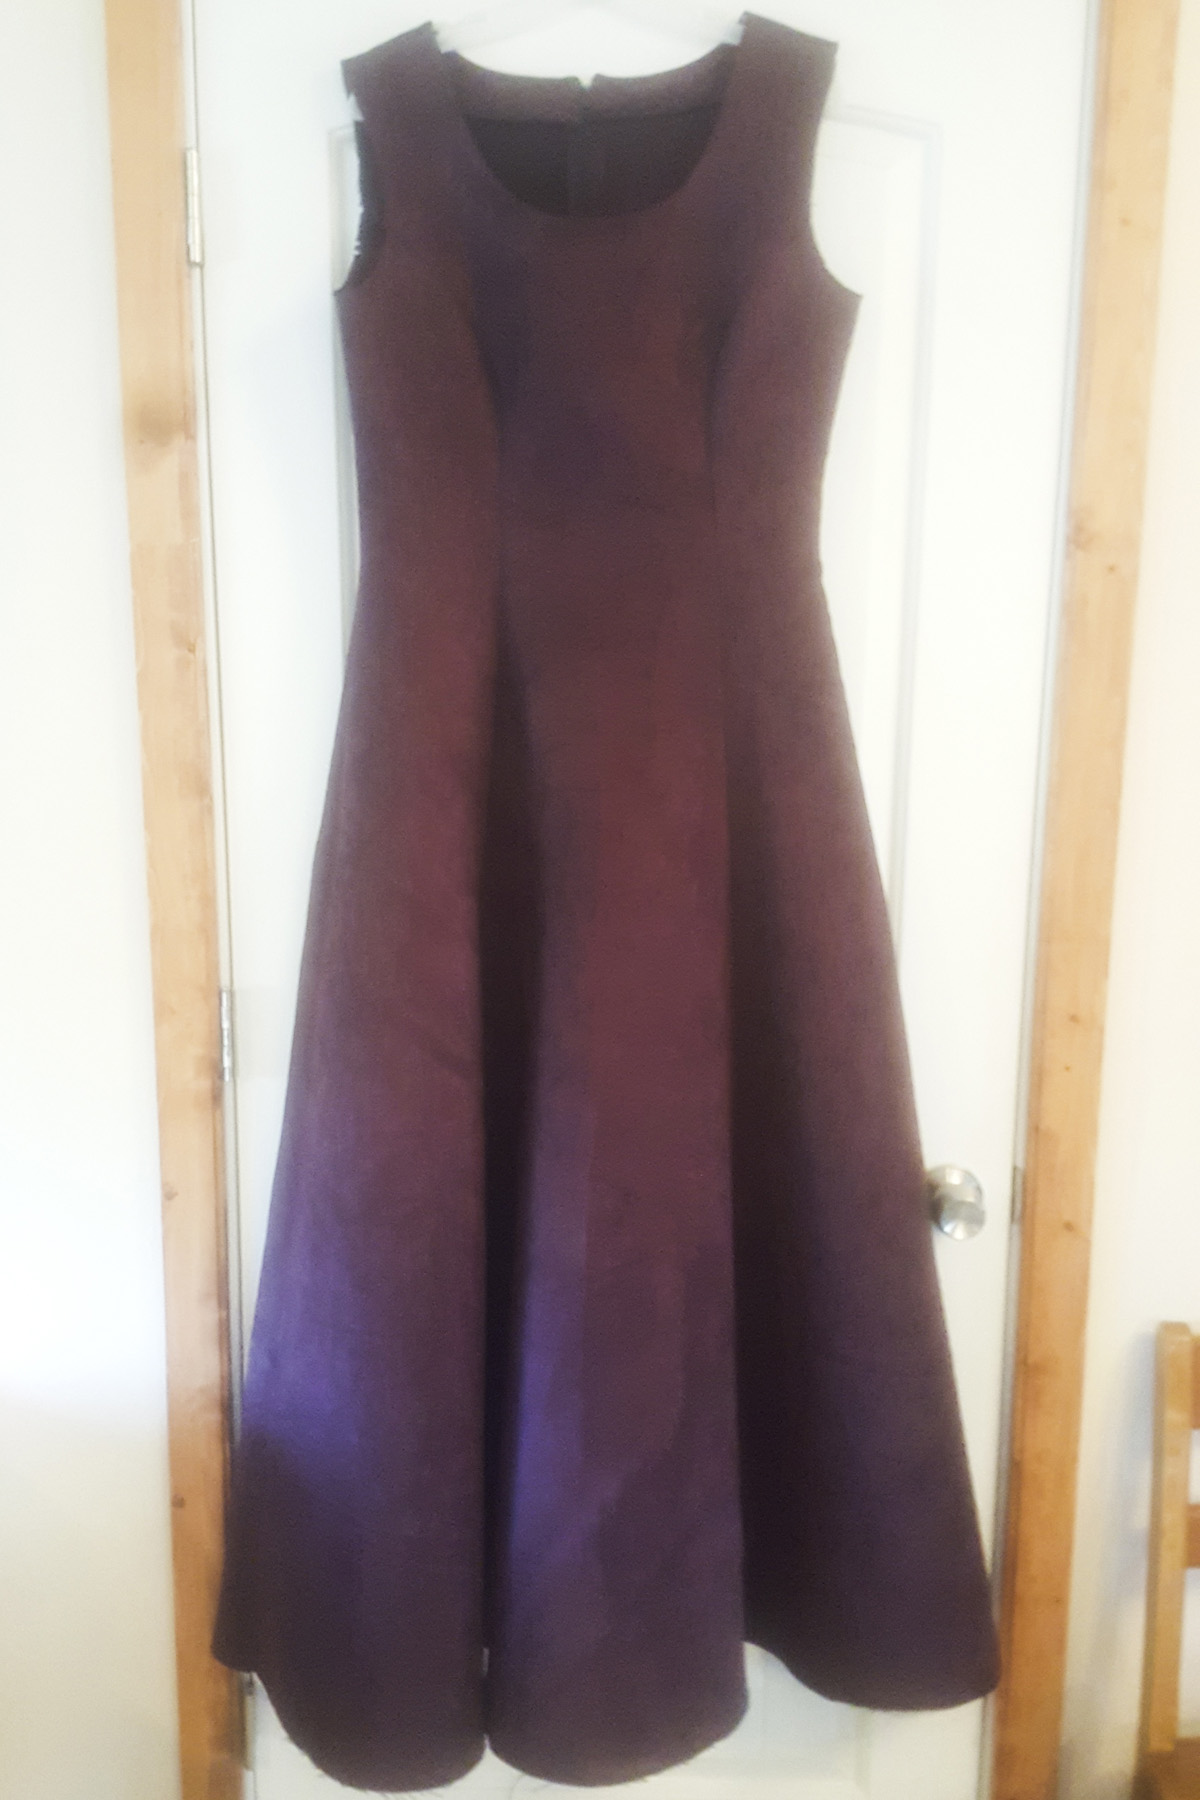 Making a Medieval Inspired LARP Dress – Swimming In A Sea of Estrogen